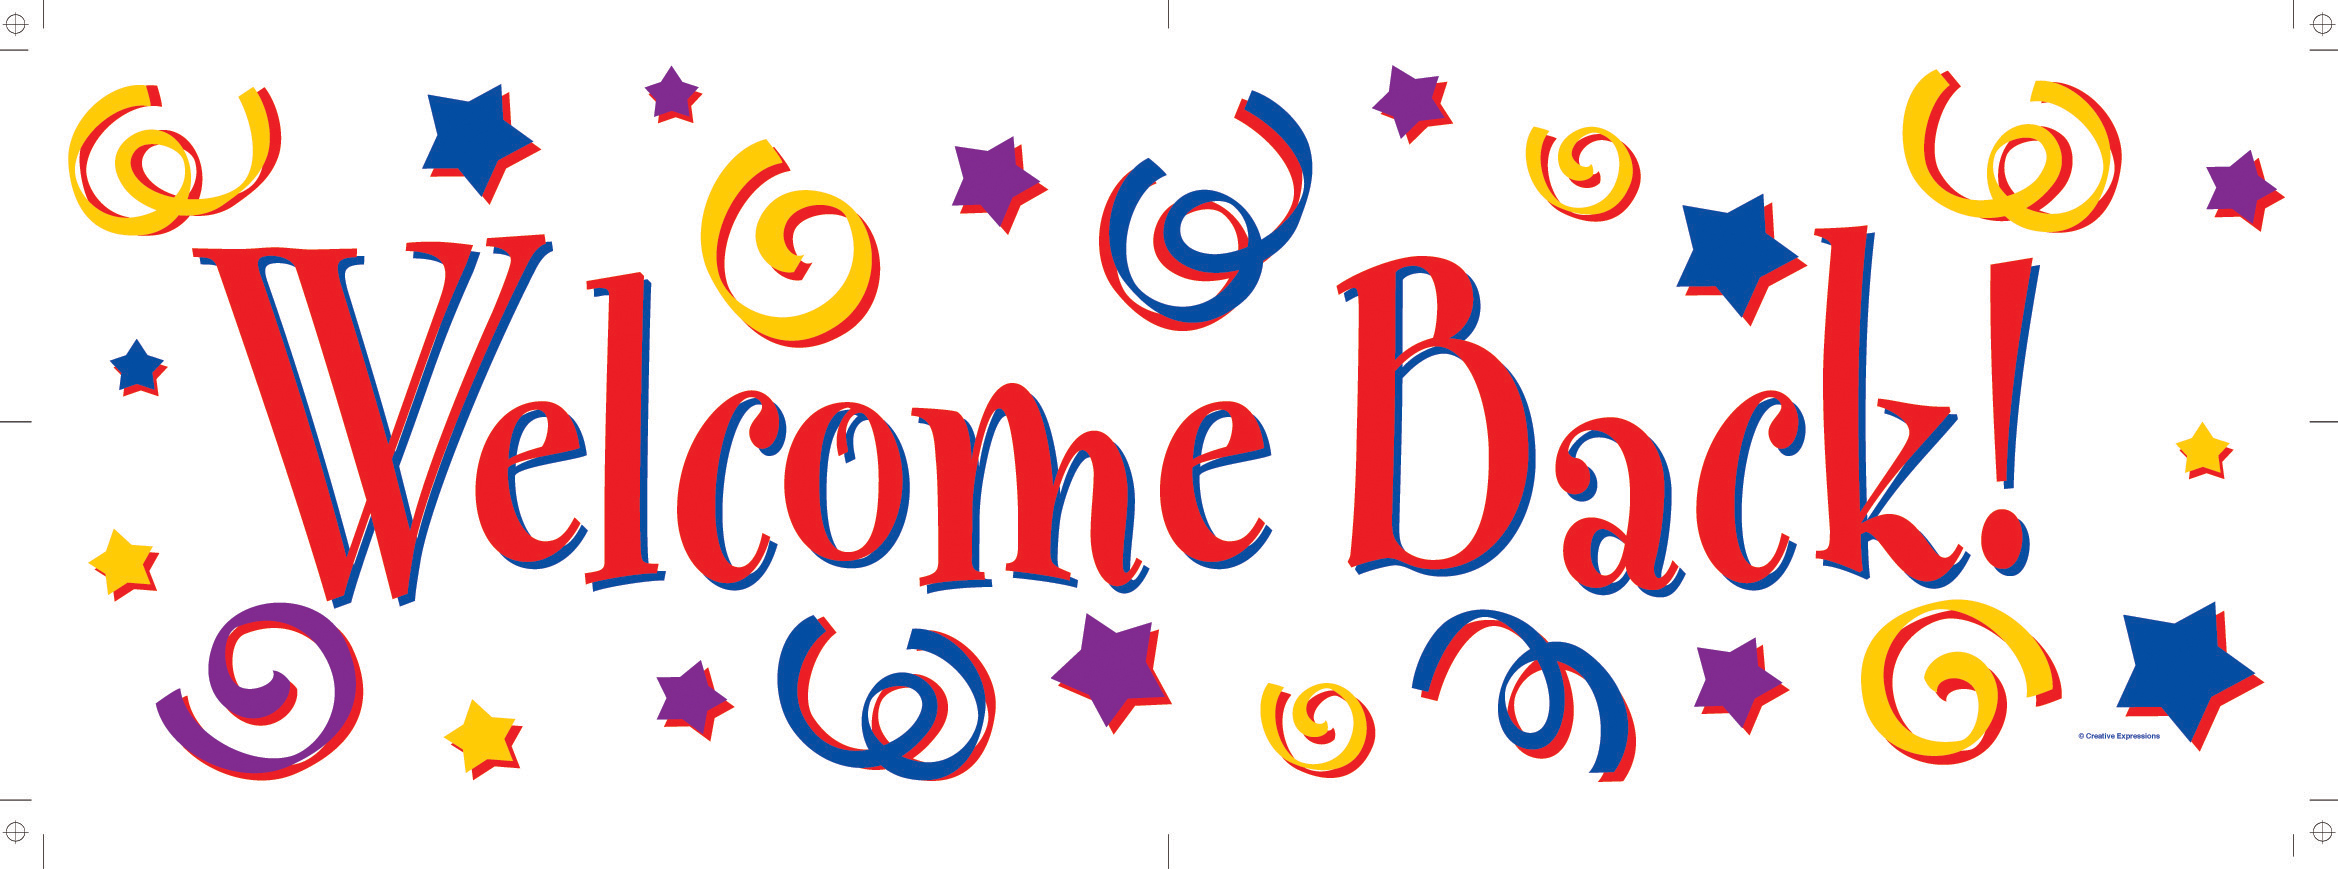 Clip Arts Related To : welcome cards for students. view all Welcome Back To...